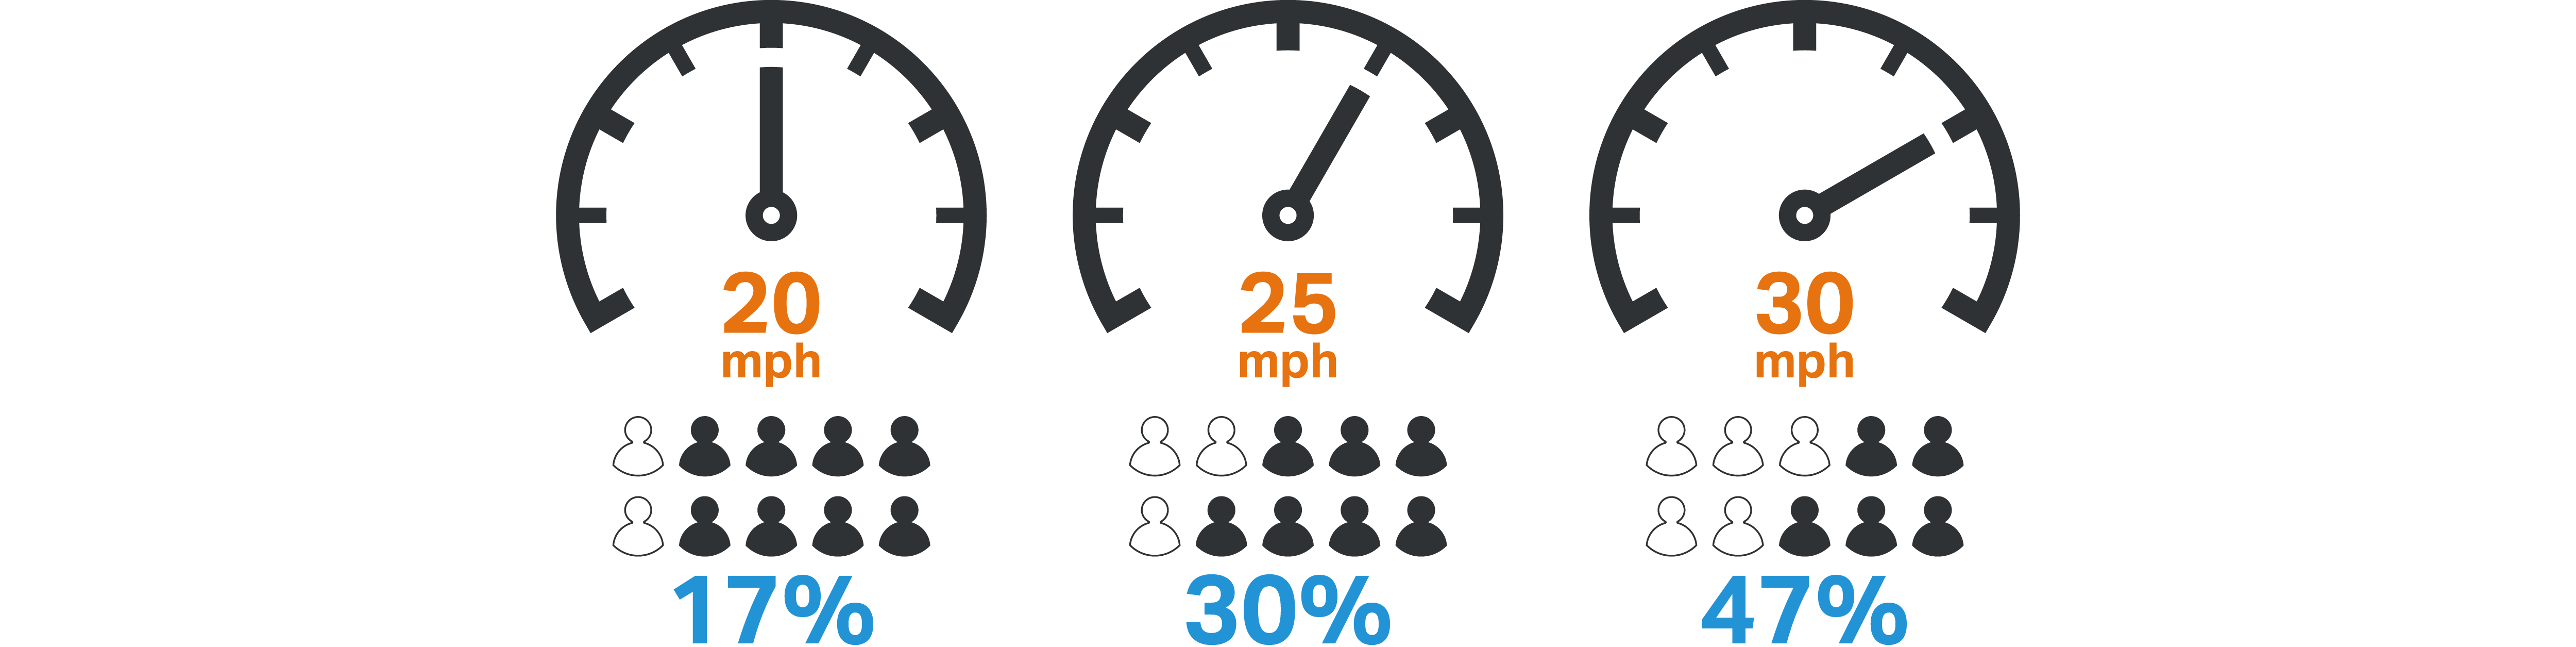 Likelihood of serious or fatal injury for pedestrians struck by drivers at various speeds. 17% at 20 mph, 30% at 25 mph, 47% at 30 mph